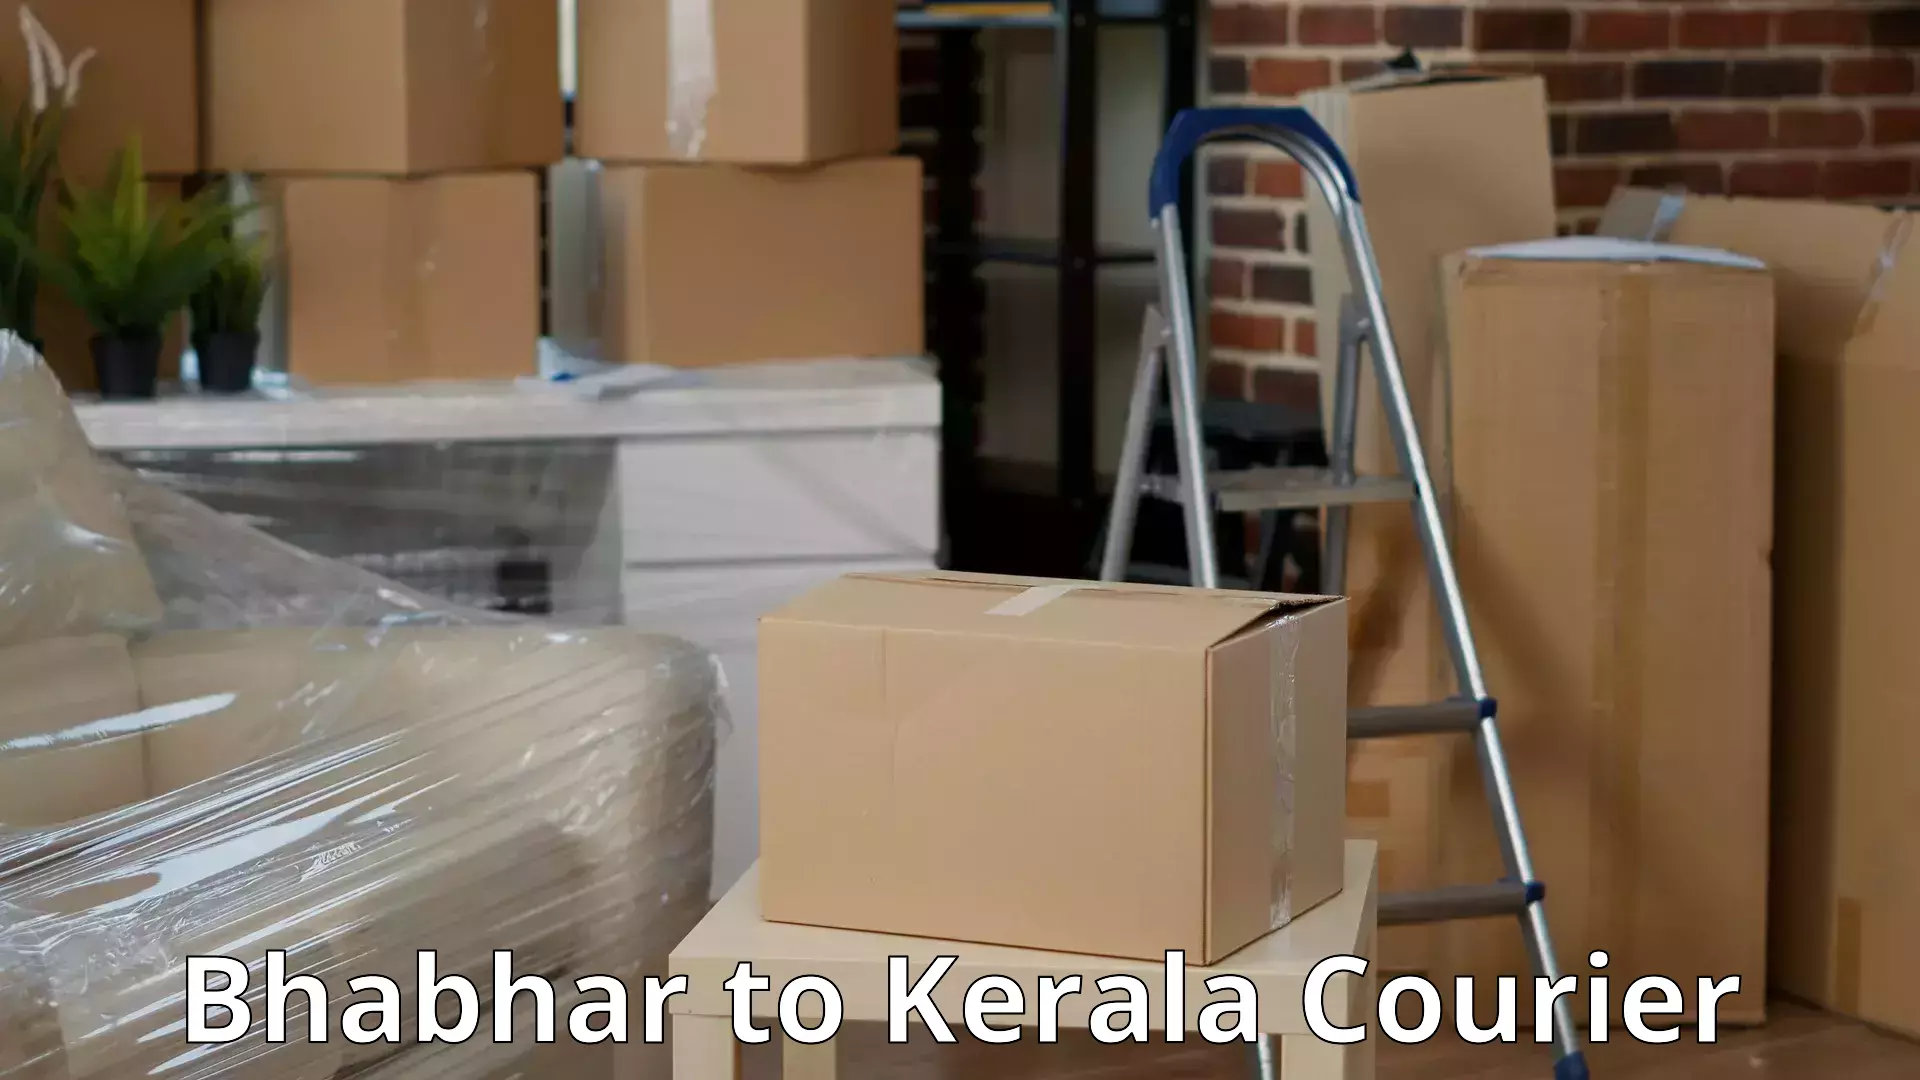 Furniture delivery service Bhabhar to Kerala